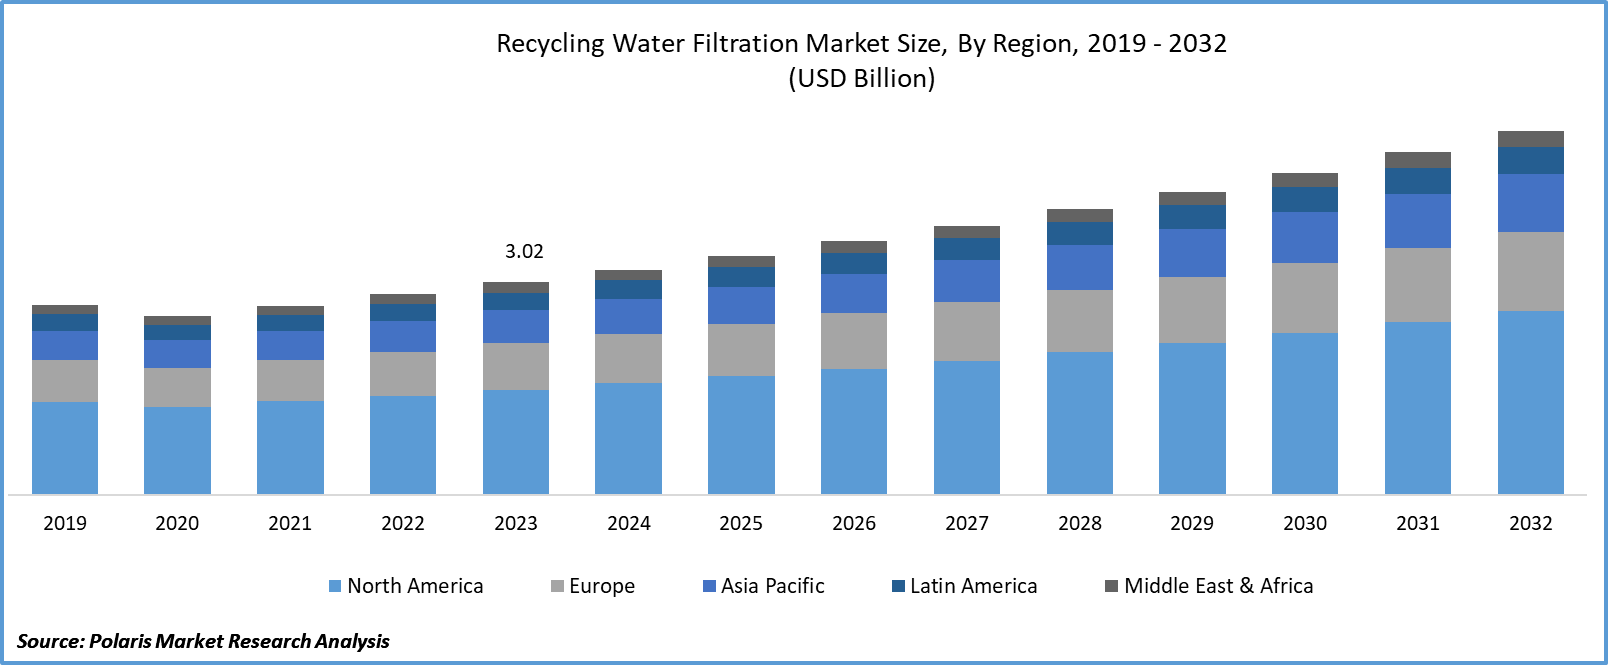 Recycling Water Filtration Market Size